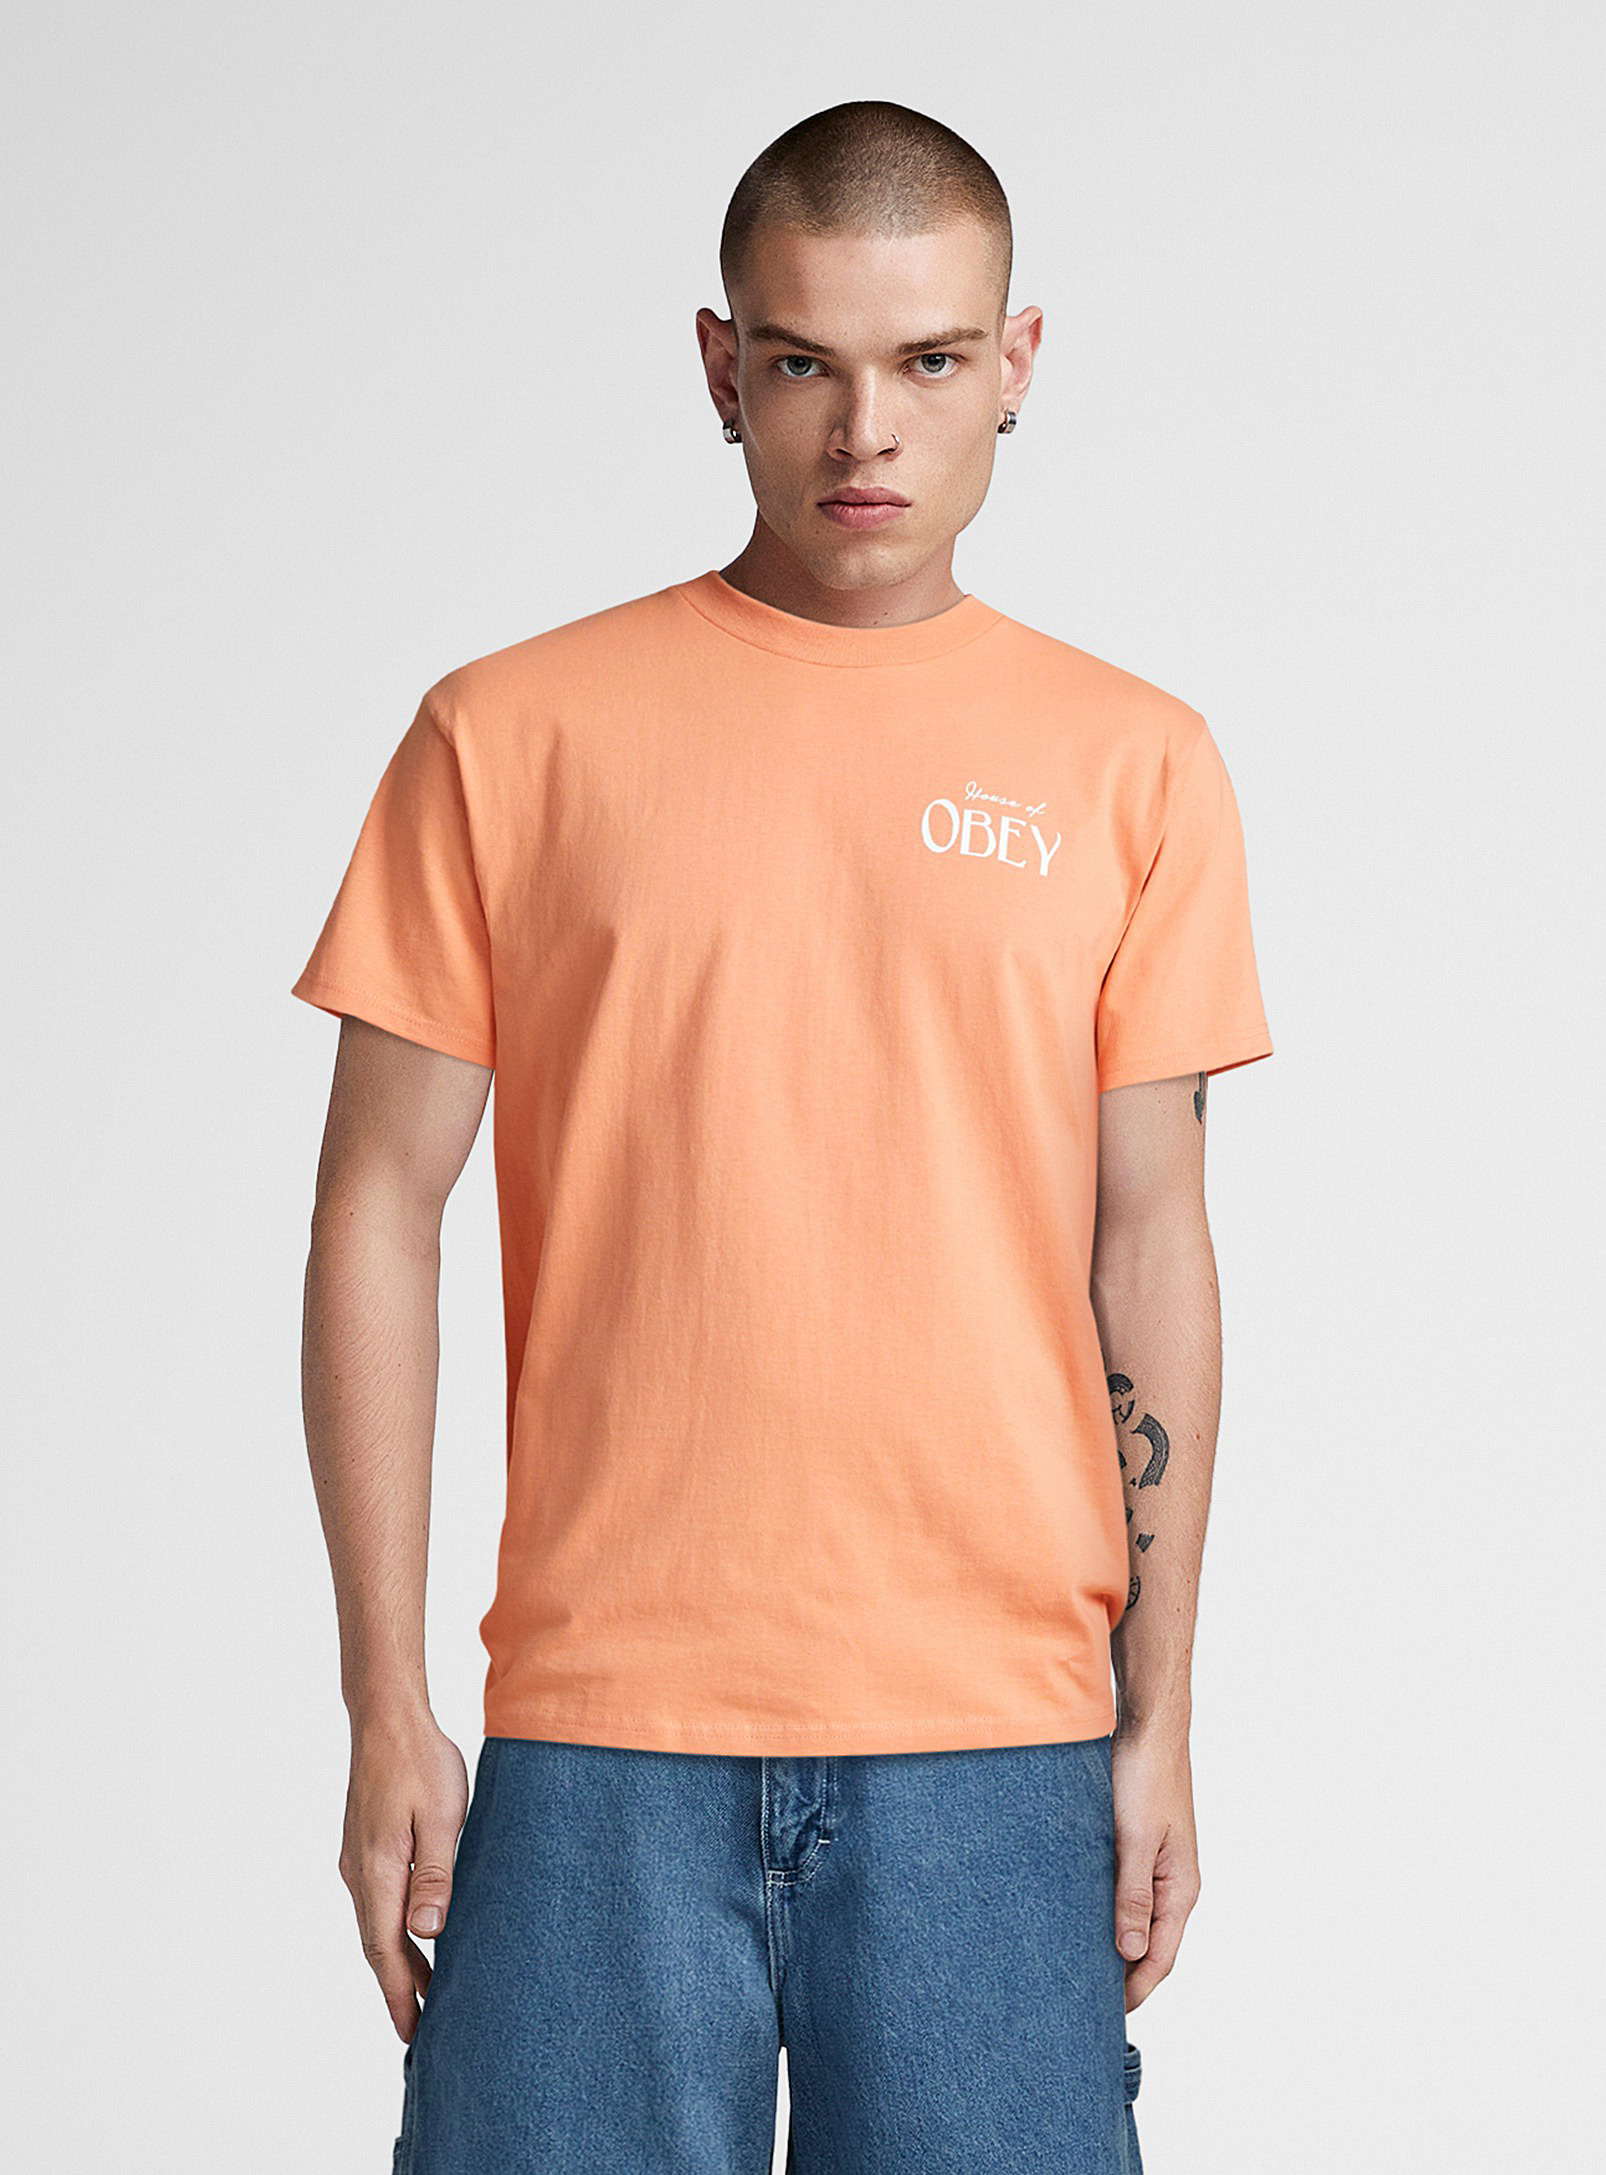 Obey - Men's Vacation T-shirt